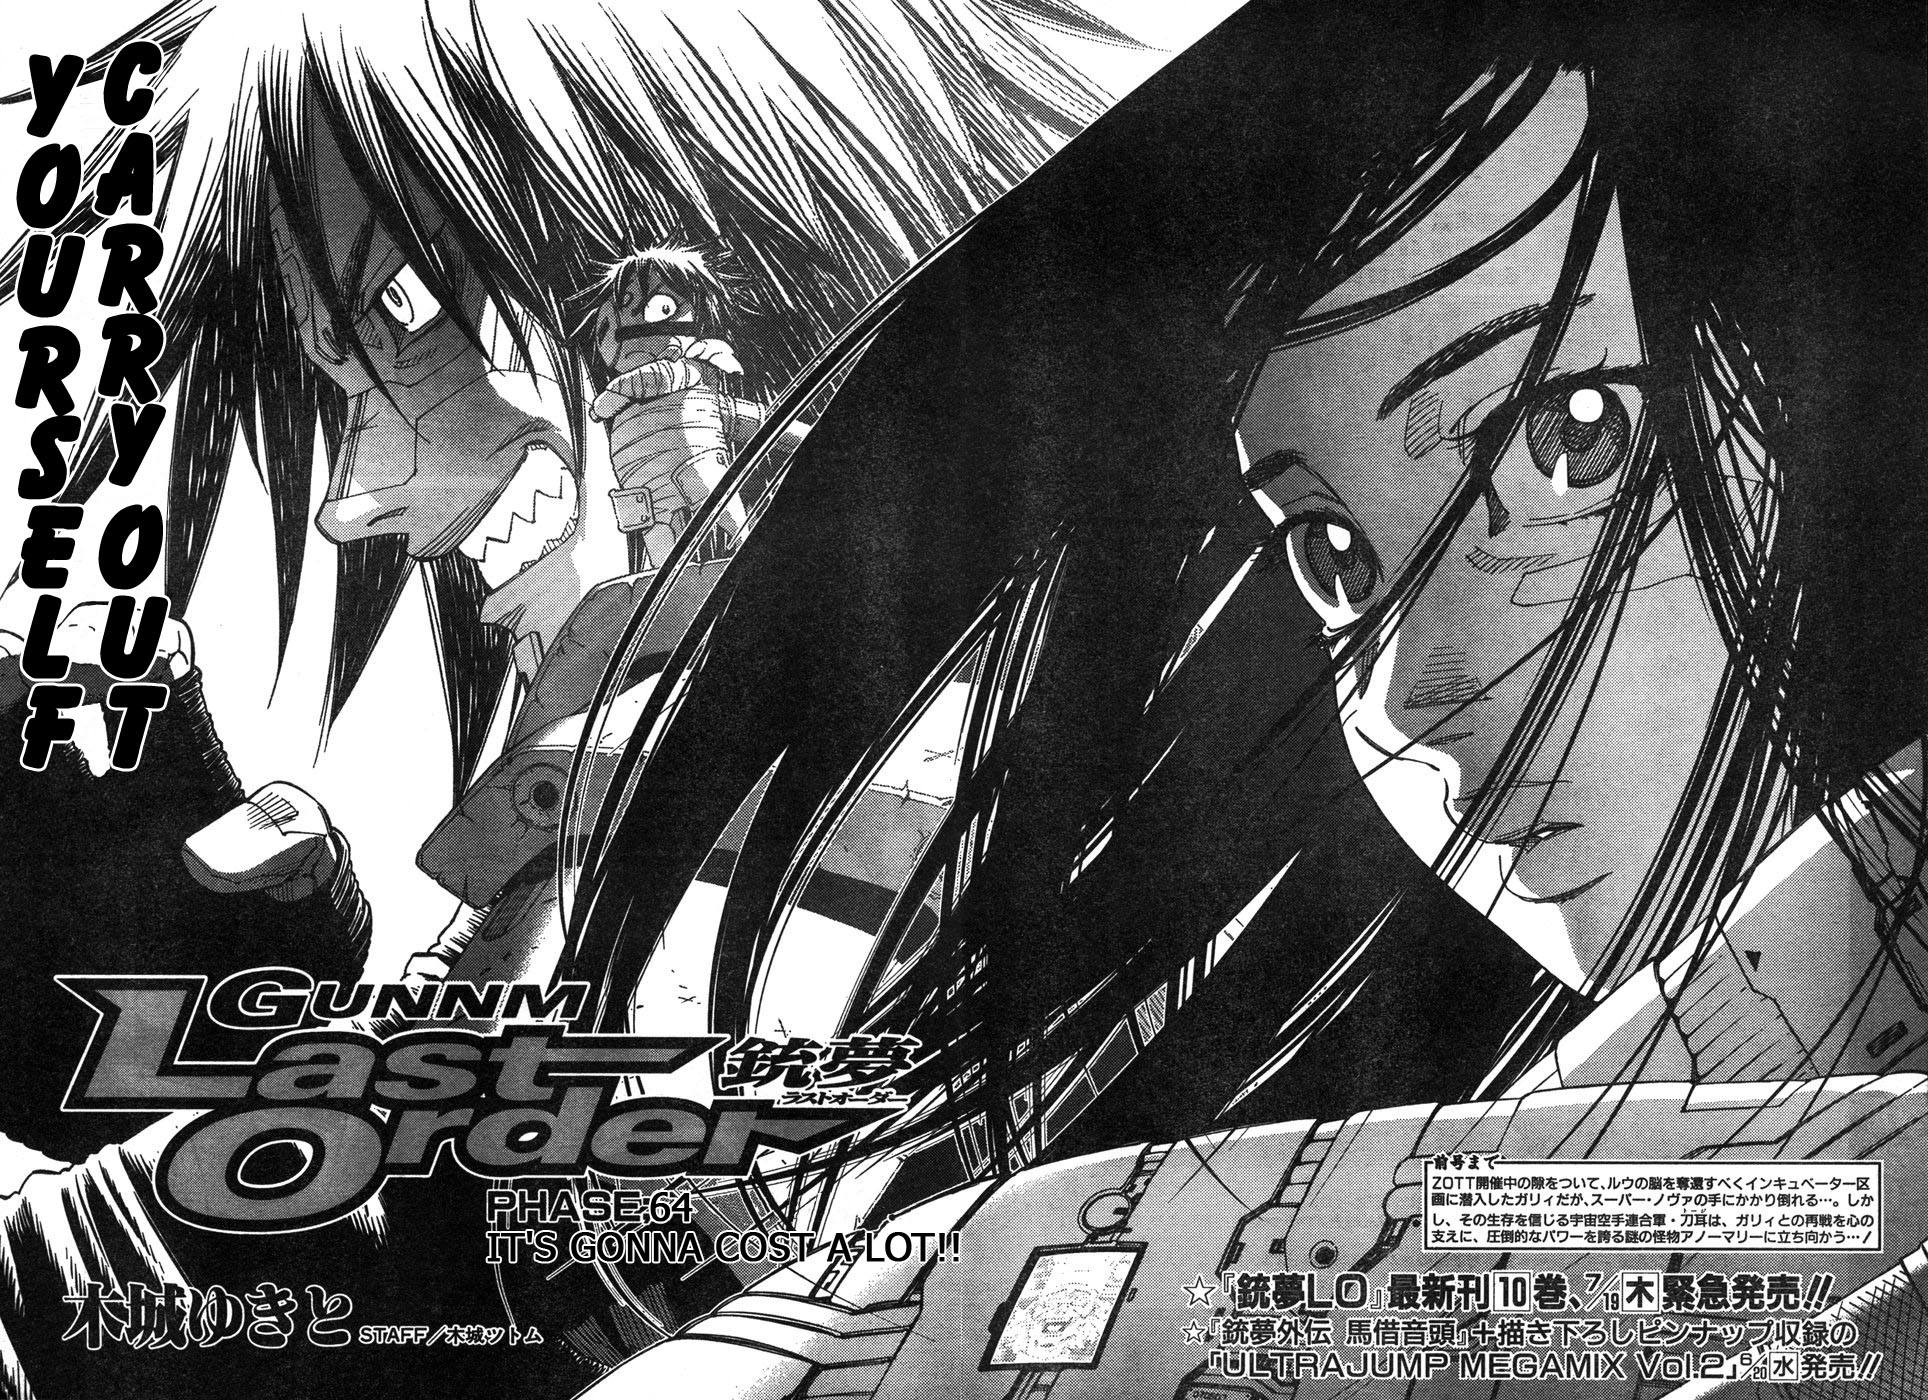 Battle Angel Alita: Last Order Vol.11 Chapter 64: It's Gonna Cost A Lot!! - Picture 2